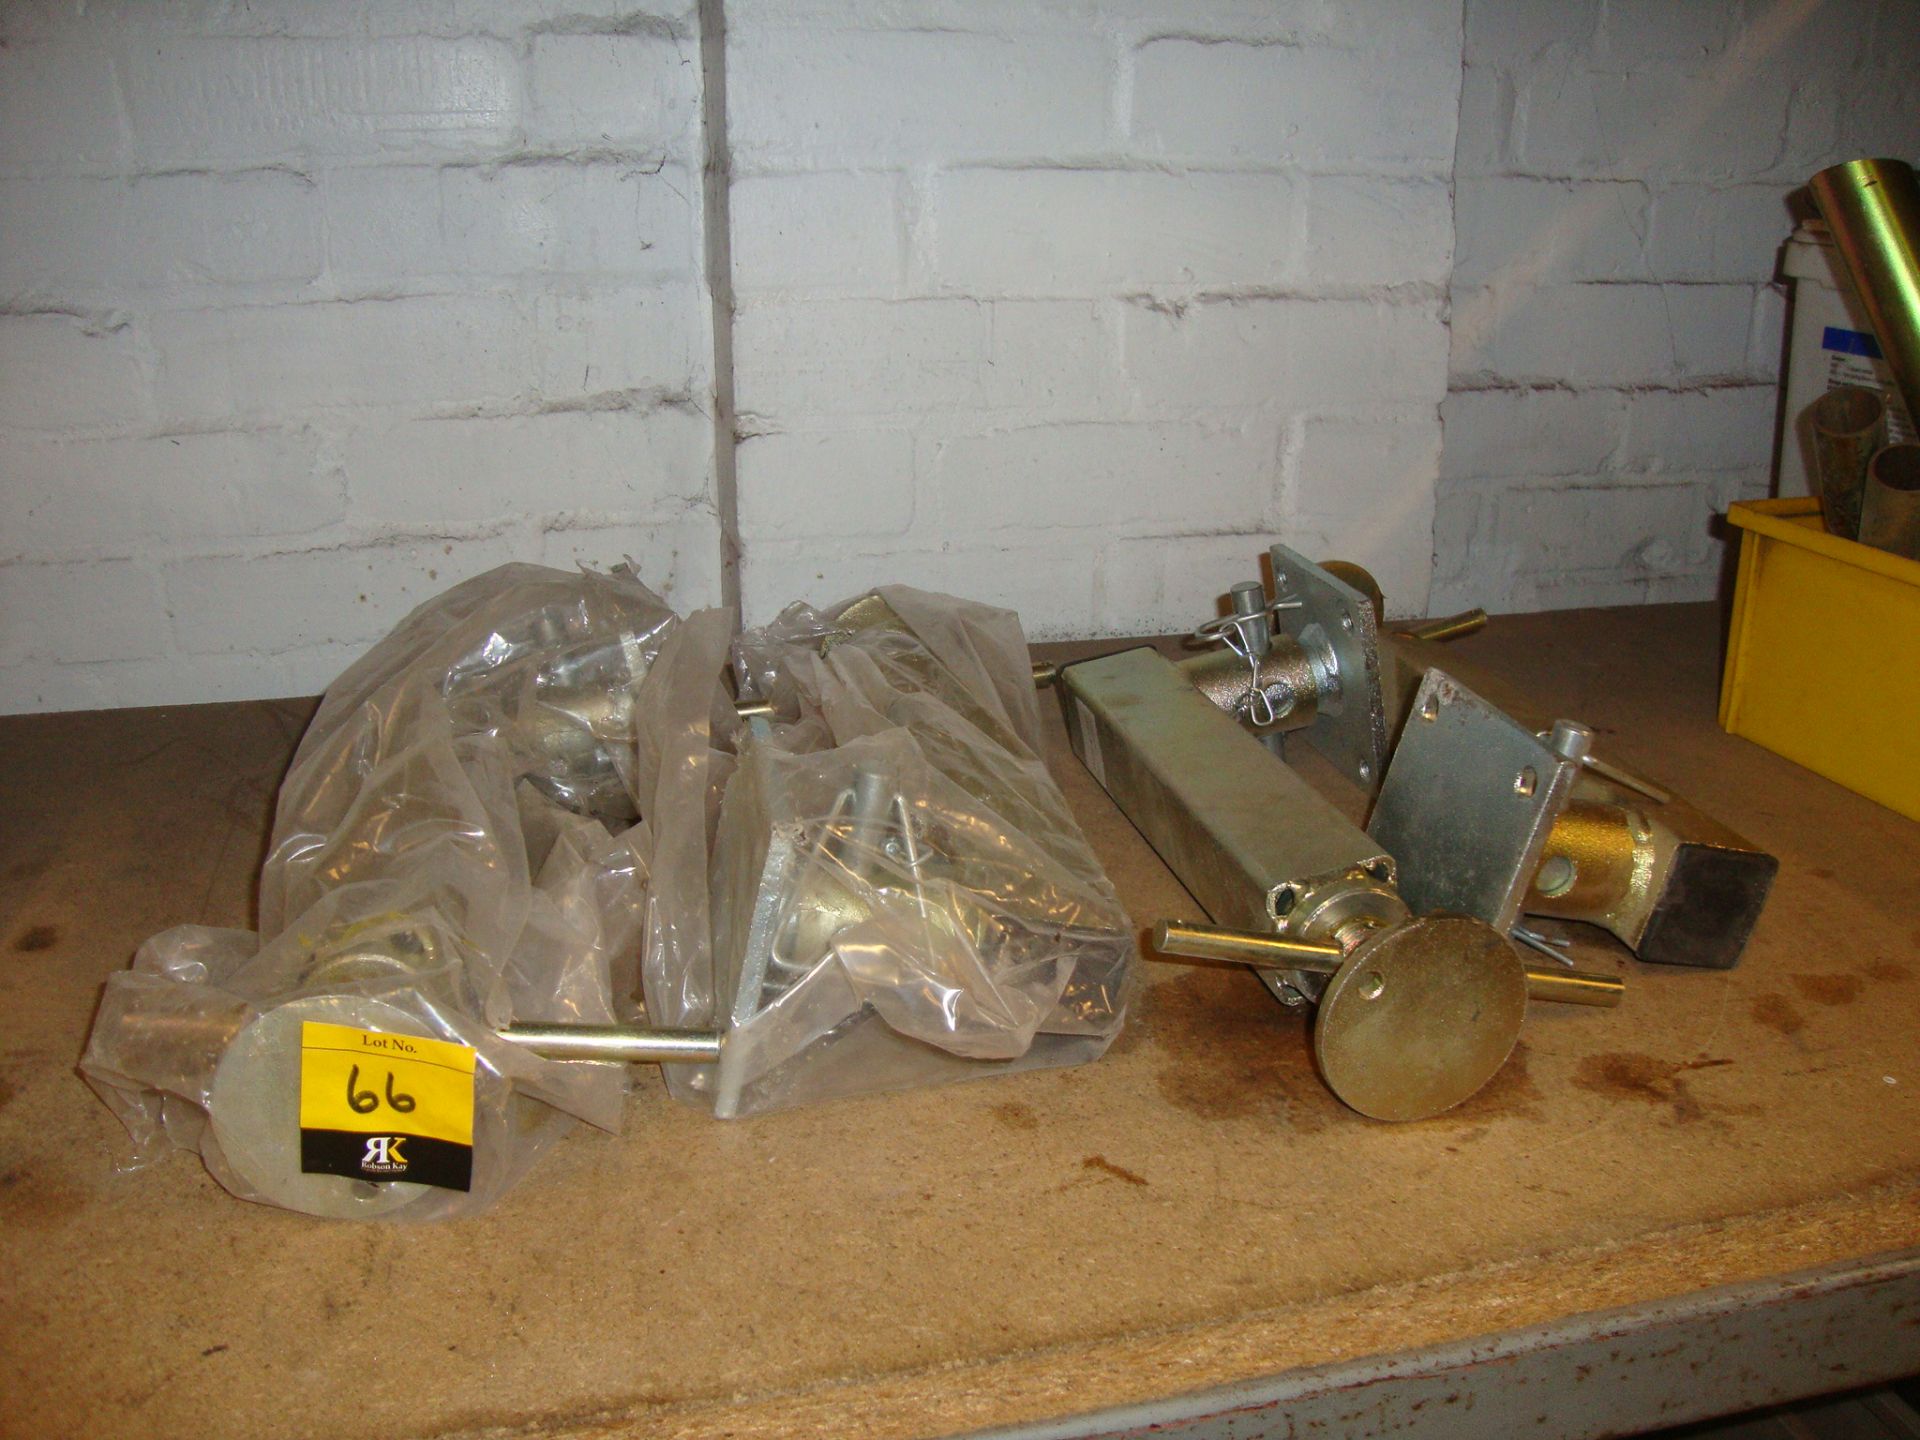 Set of 4 height-adjustable trailer legs. This lot is exempt from VAT, however it is still subject to